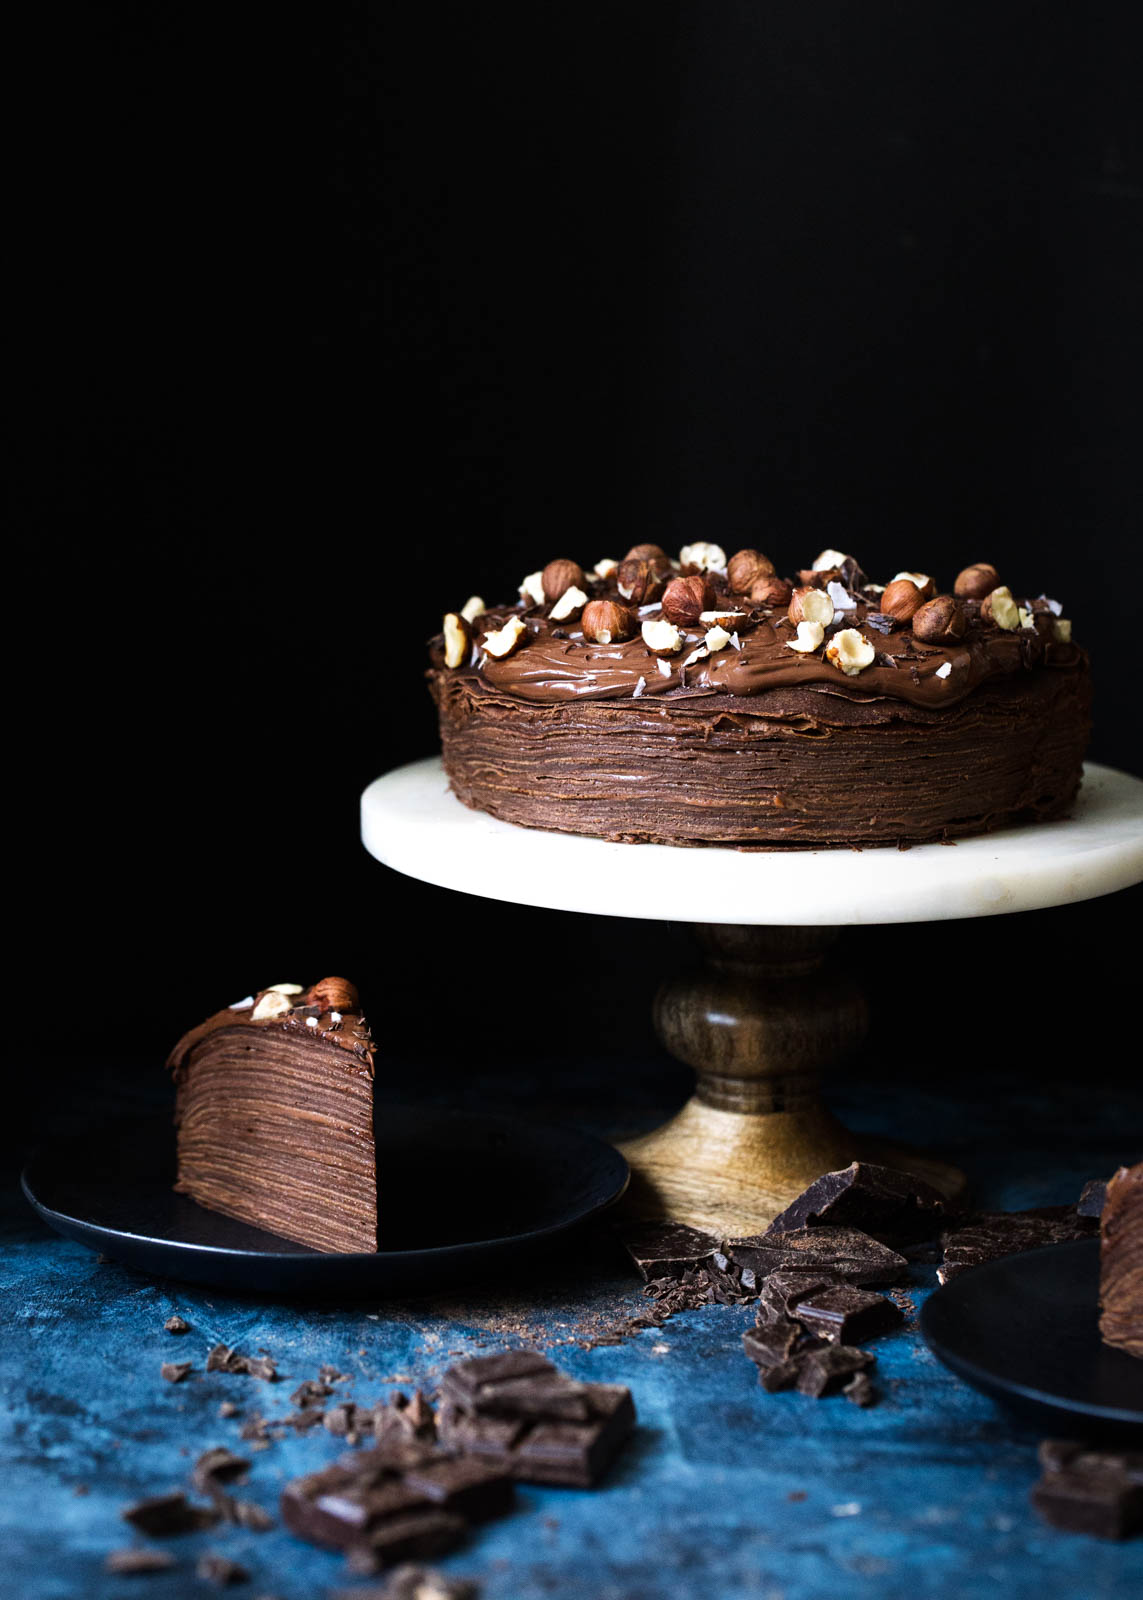 Stacks on stacks of chocolate crêpes and hazelnut pastry cream make for a stunning layered cake.